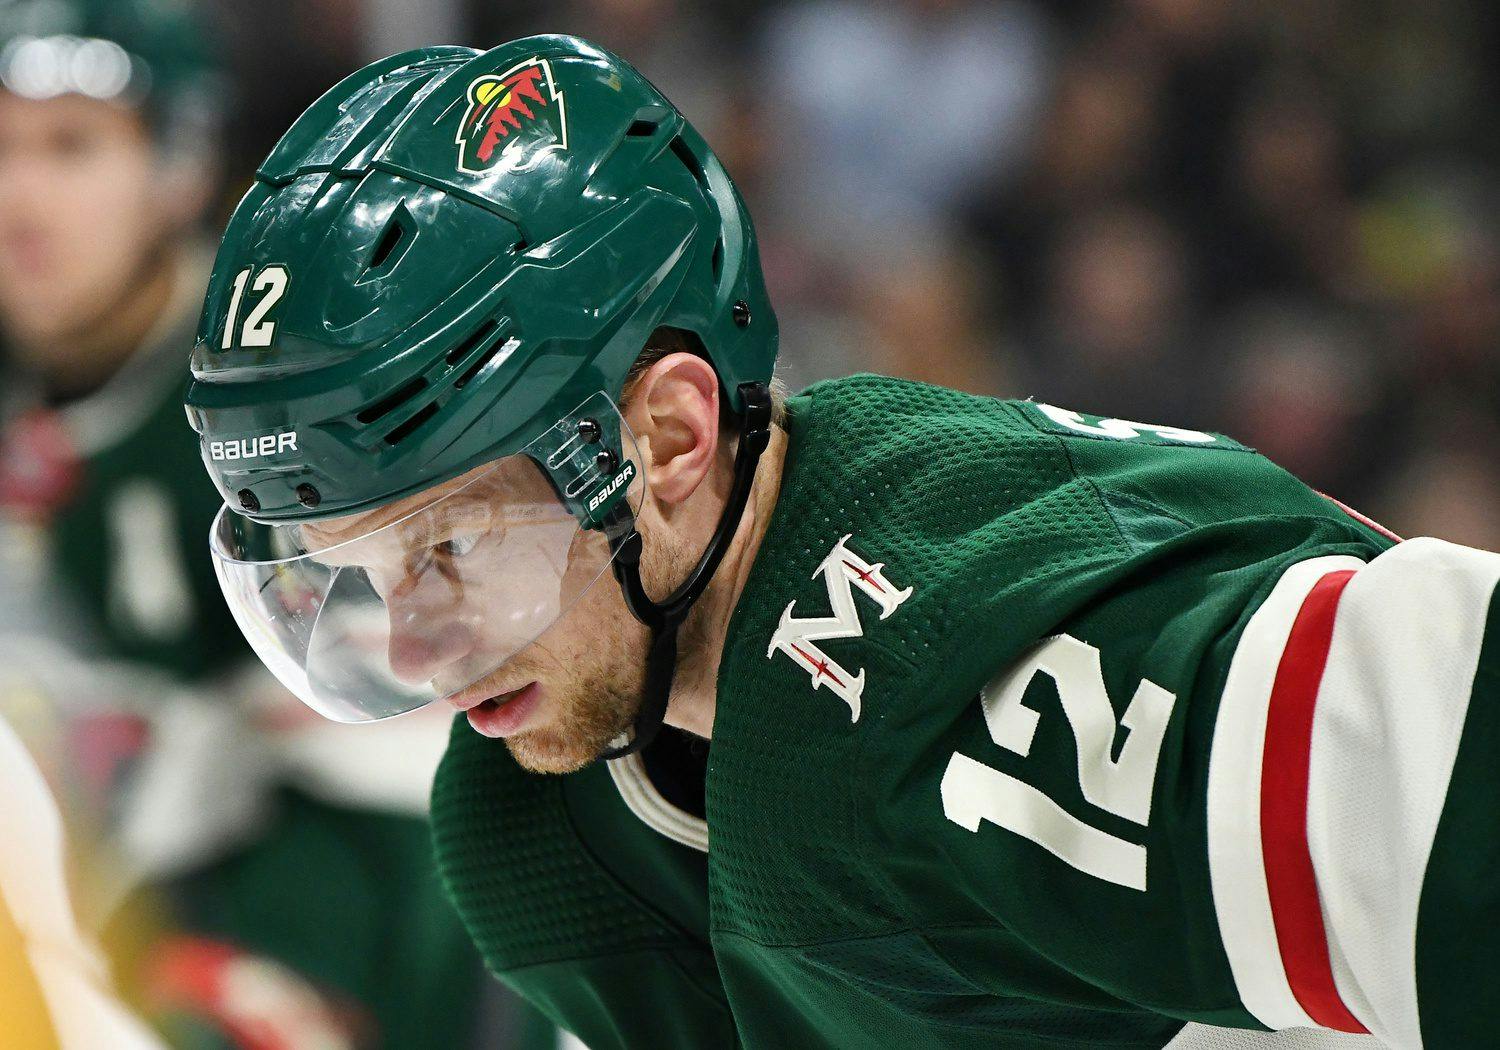 Eric Staal is joining the AHL Iowa Wild; in Olympics next stop?